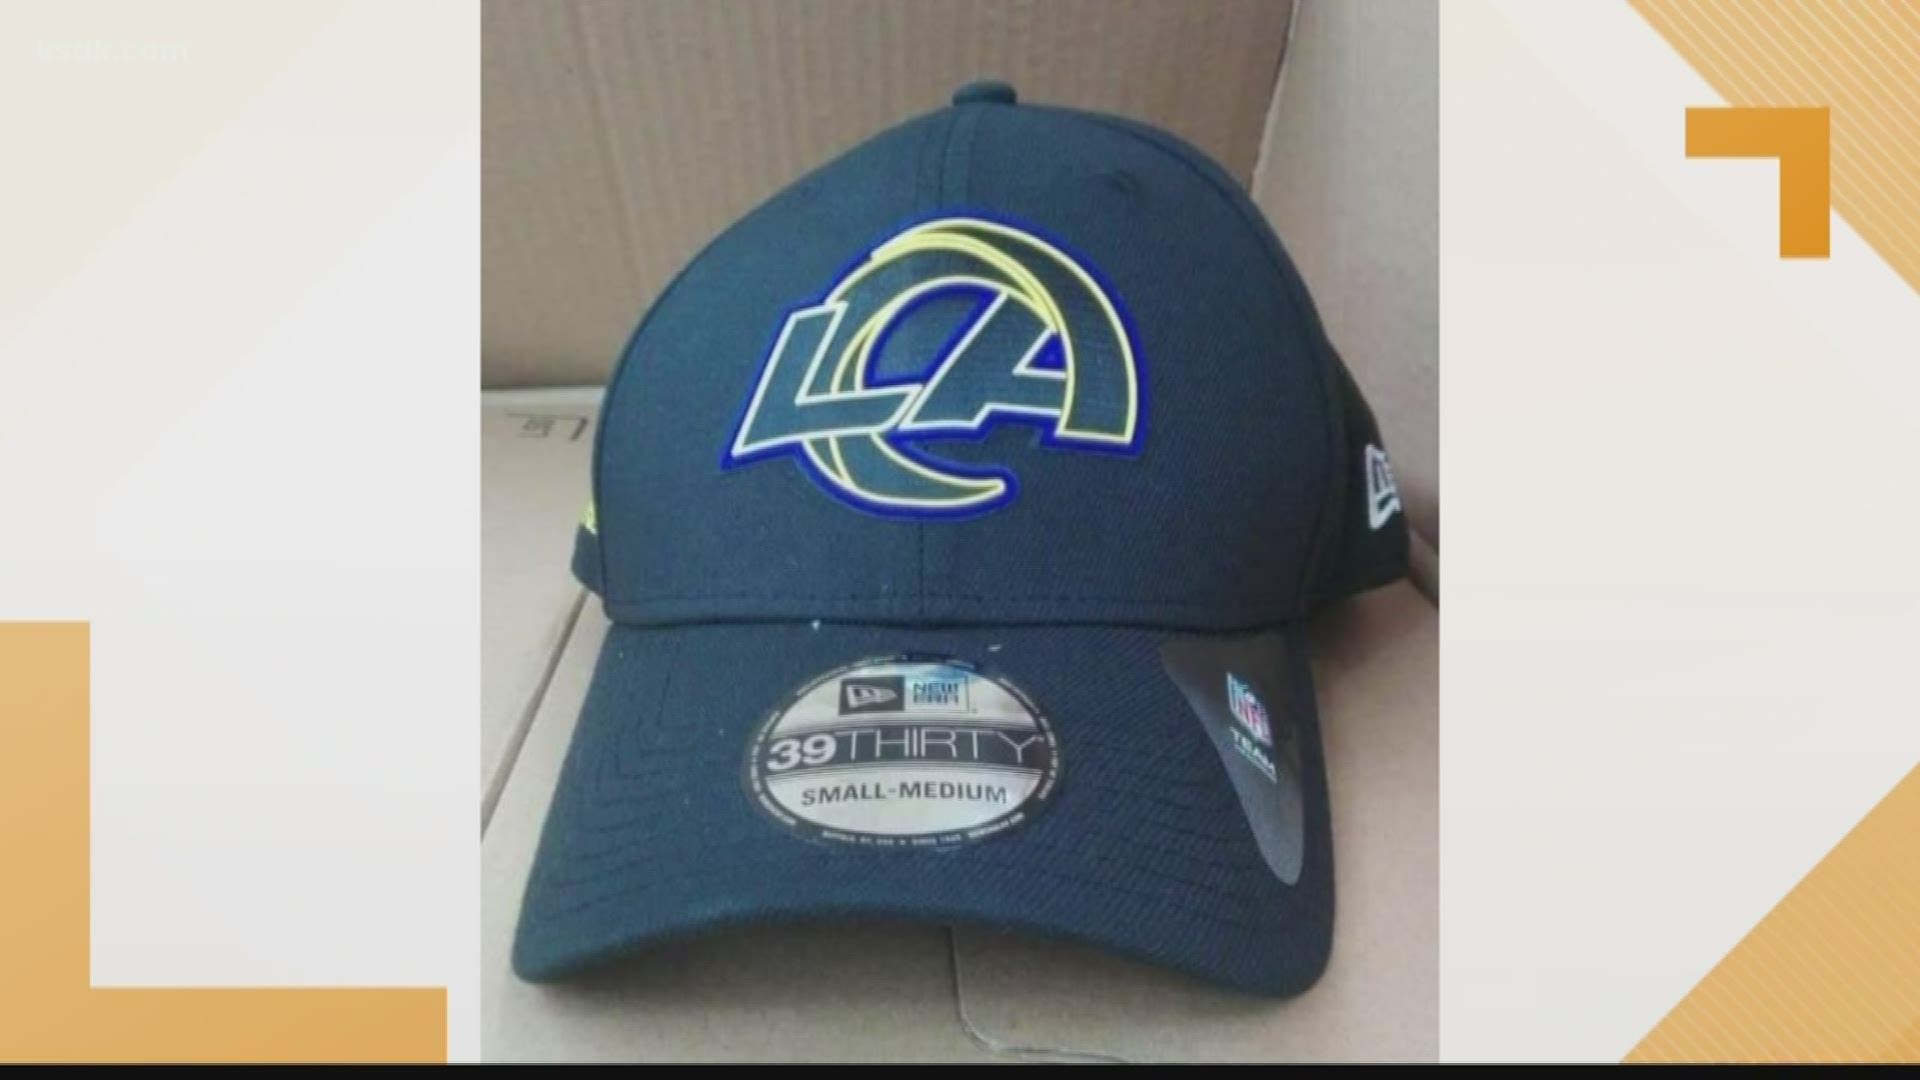 Photos of what appears to be a new logo for the Los Angeles Rams have surfaced online